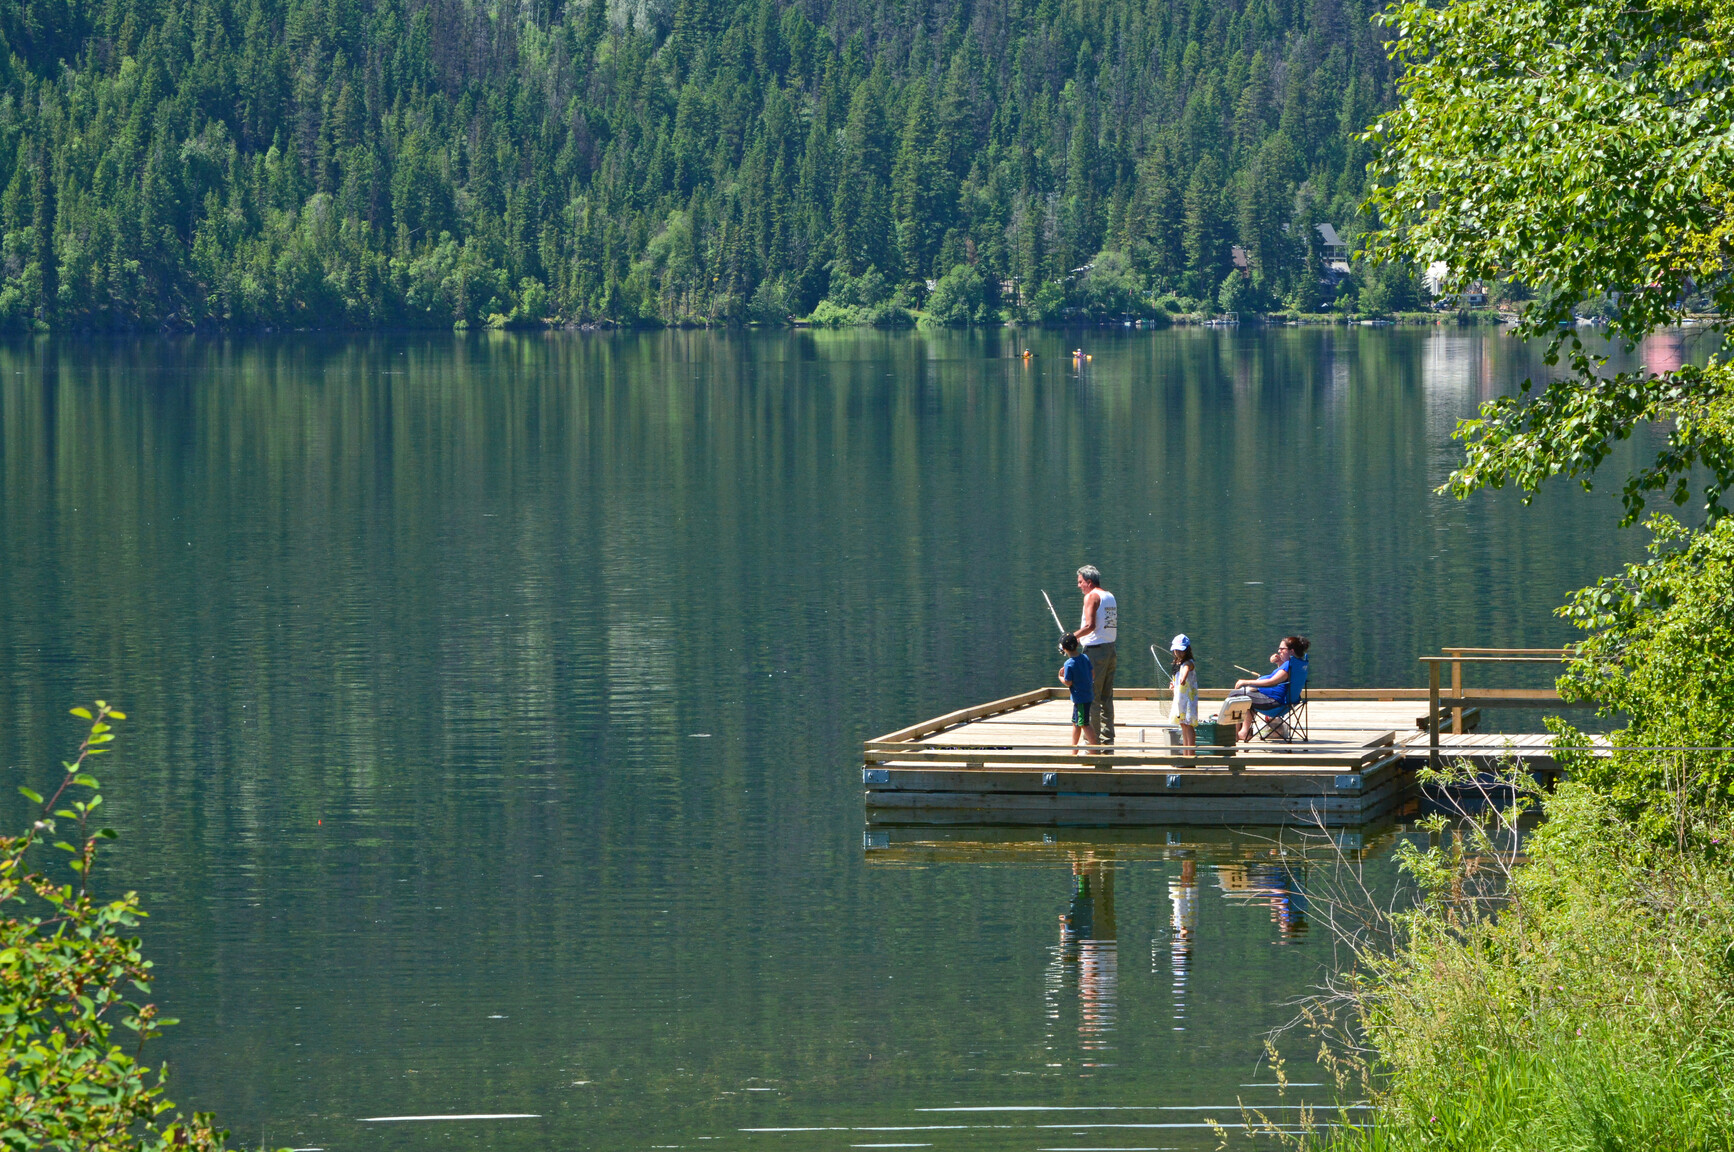 Family fishing off the dock. Kayakers on the lake. Mountains and forests in background.